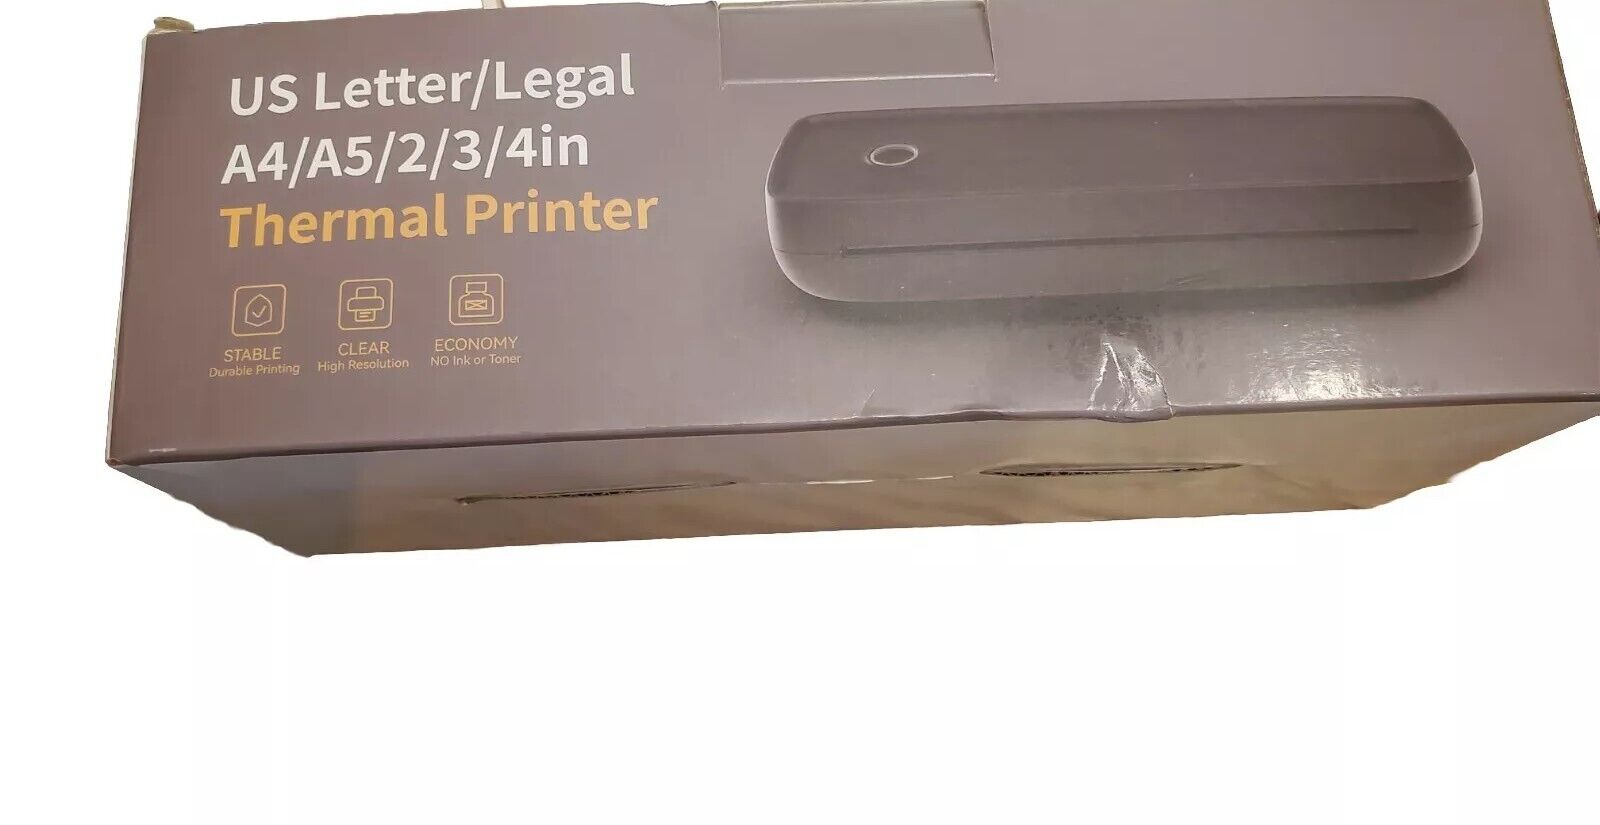 US Letter Legal A4 A5 2 3 4 in Thermal Printer Portable A80